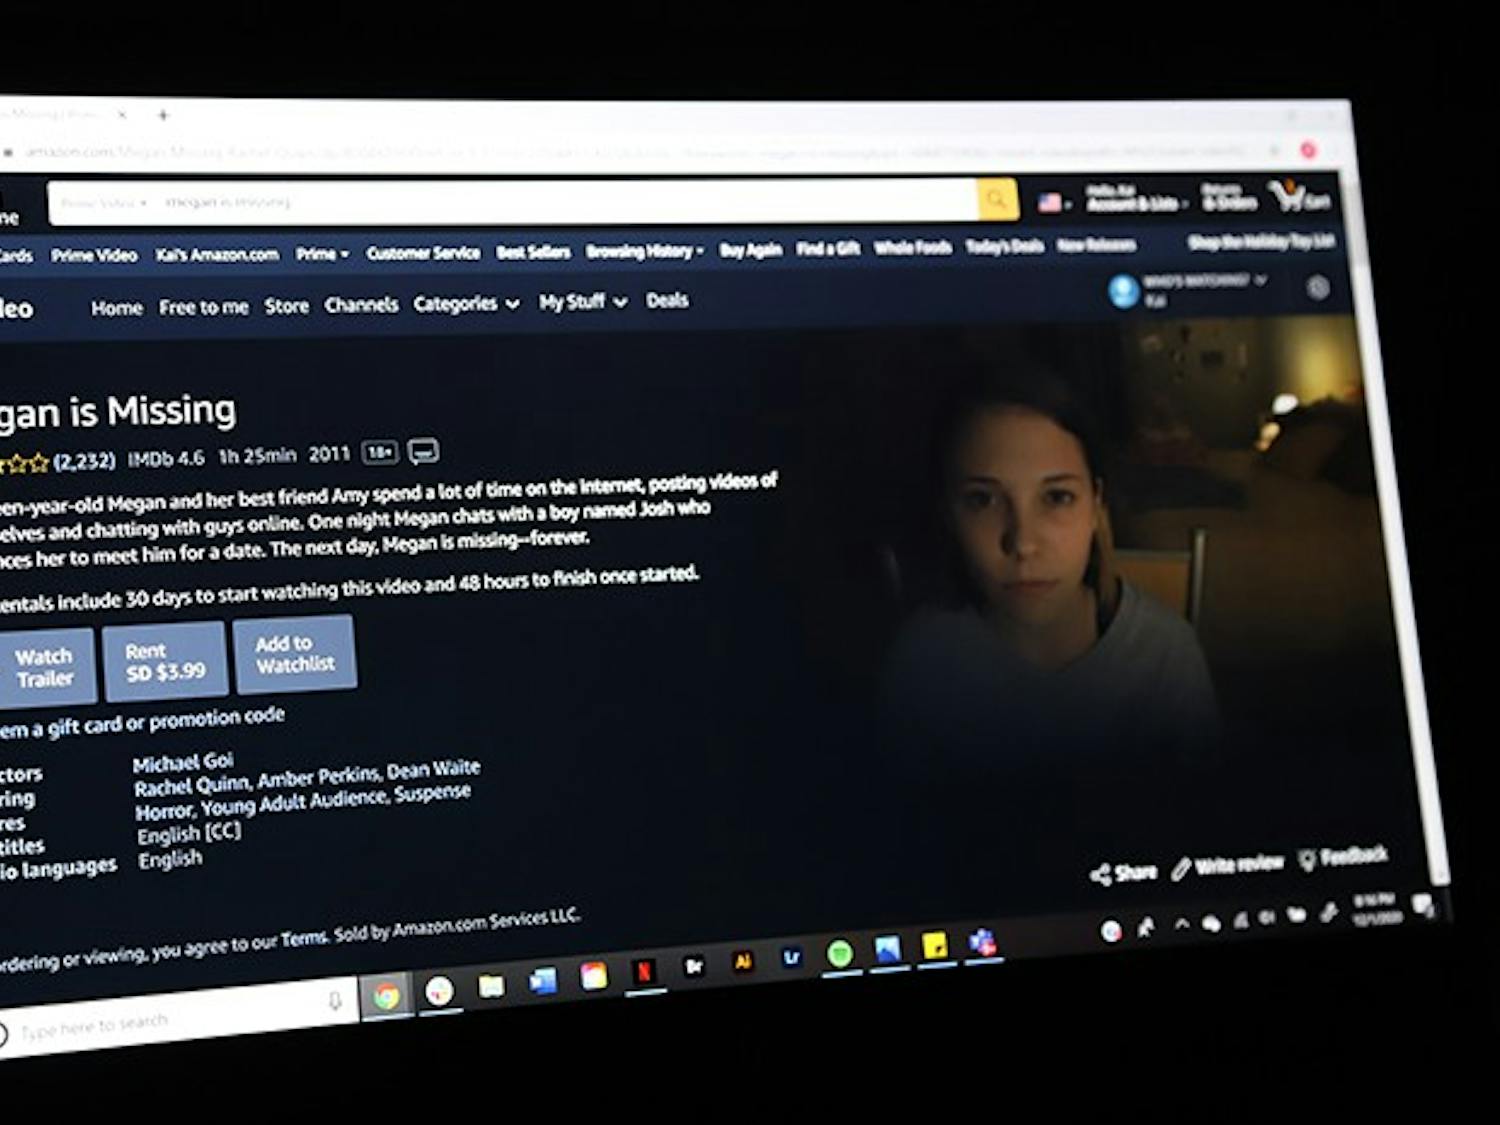 &nbsp;"Megan Is Missing" is a horror/thriller about a 14-year-old girl who goes missing when she meets a boy for a date. The movie is available on Amazon Video and YouTube.&nbsp;